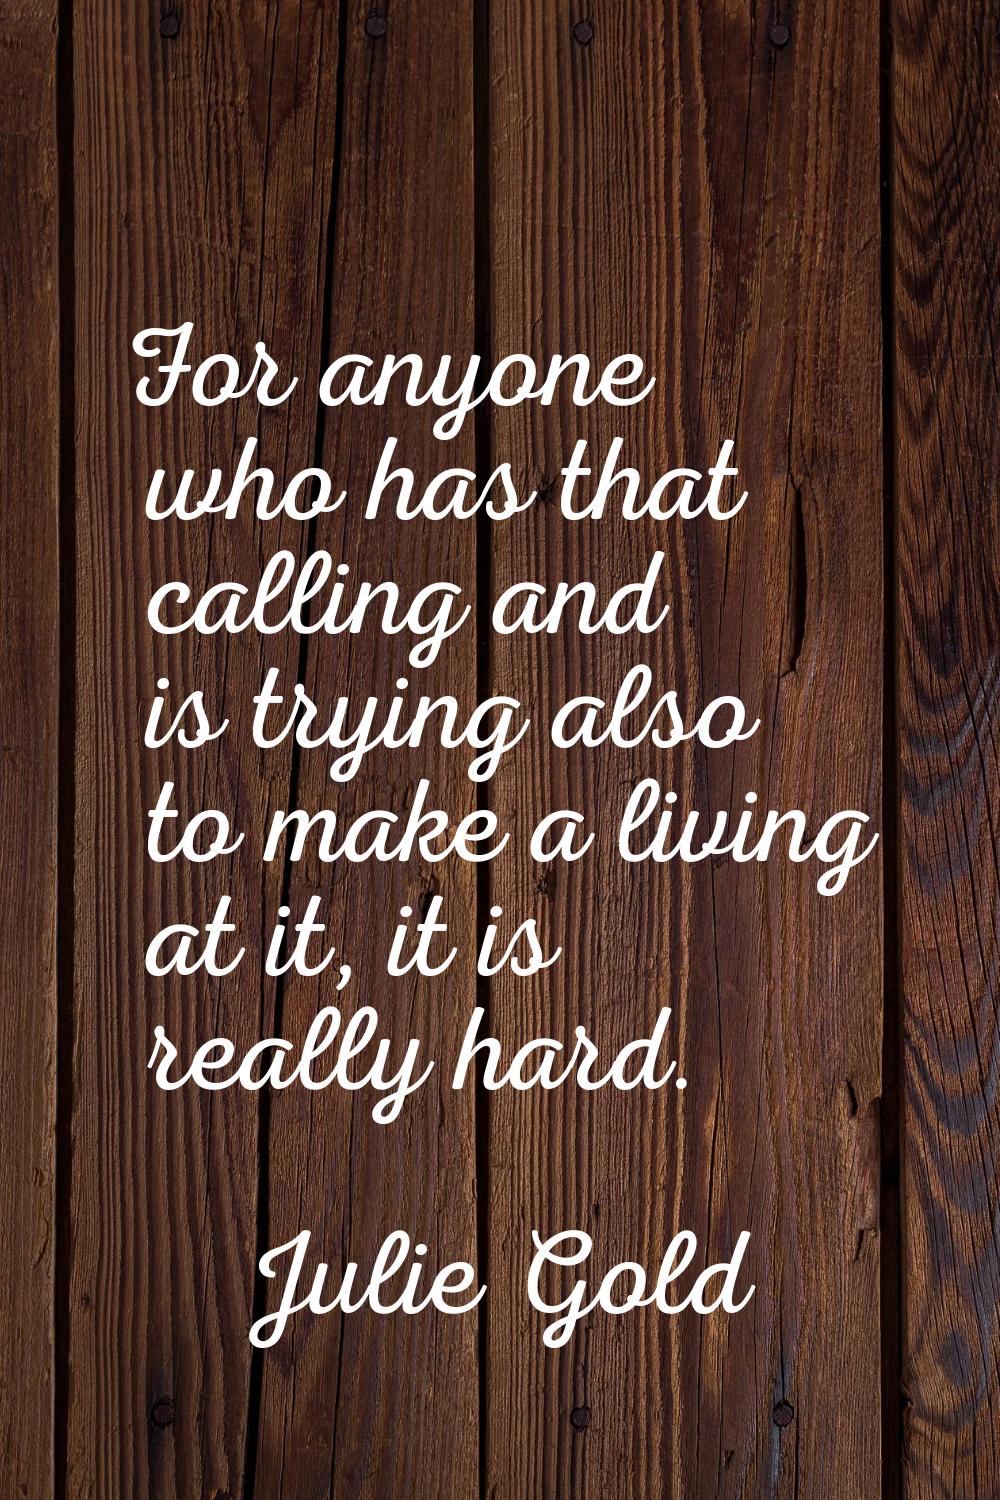 For anyone who has that calling and is trying also to make a living at it, it is really hard.